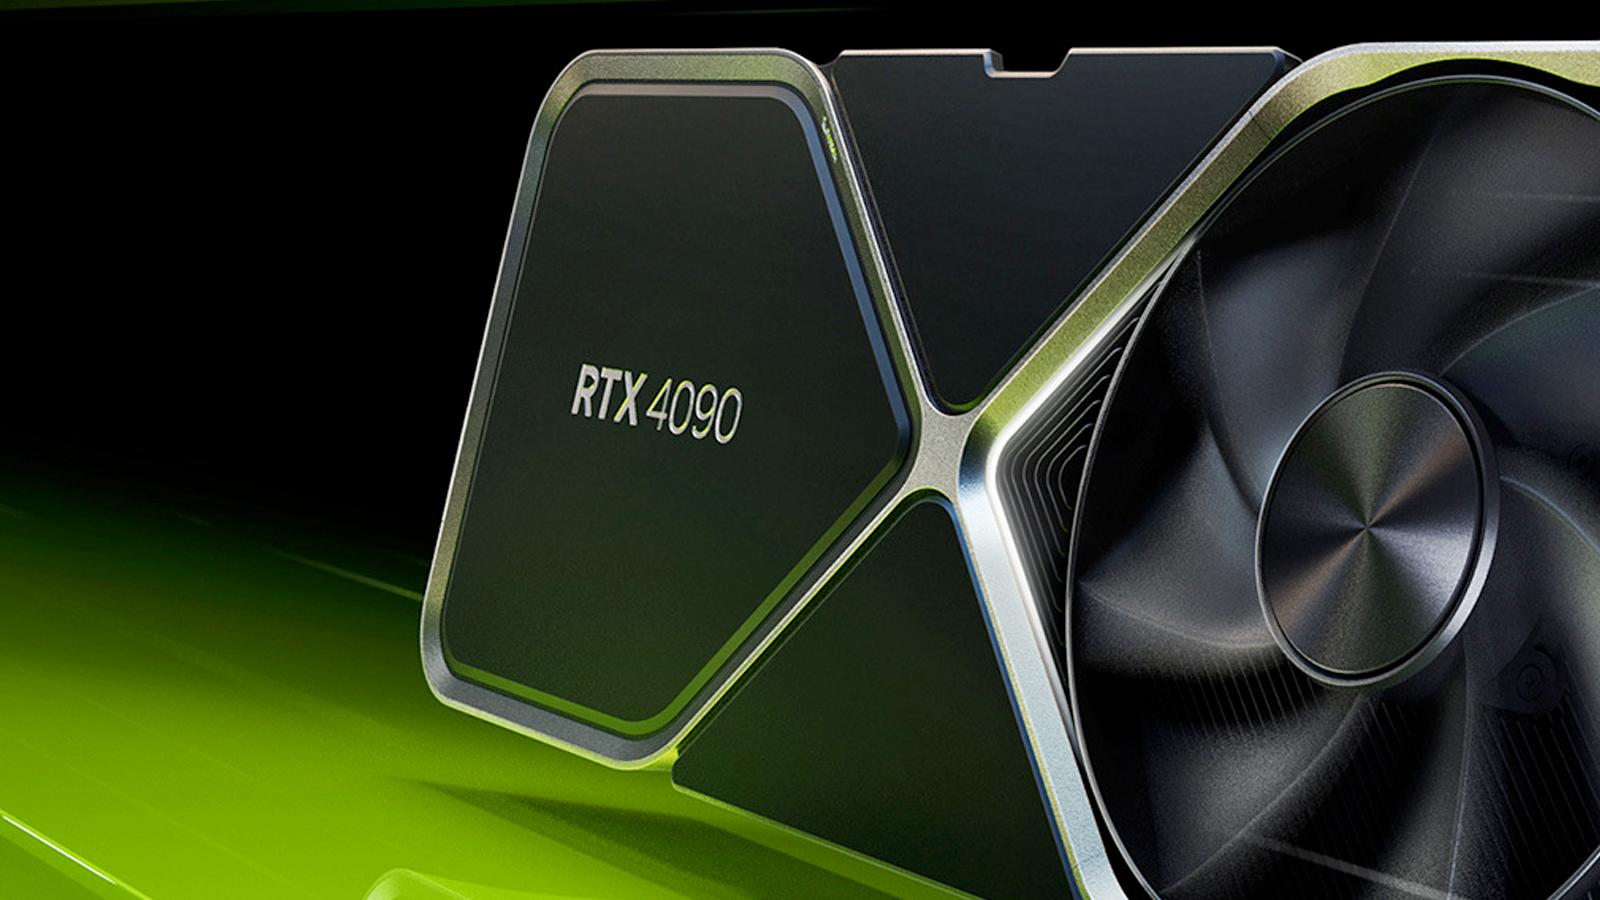 Where to buy the Nvidia RTX 4090: Specs, price, release date